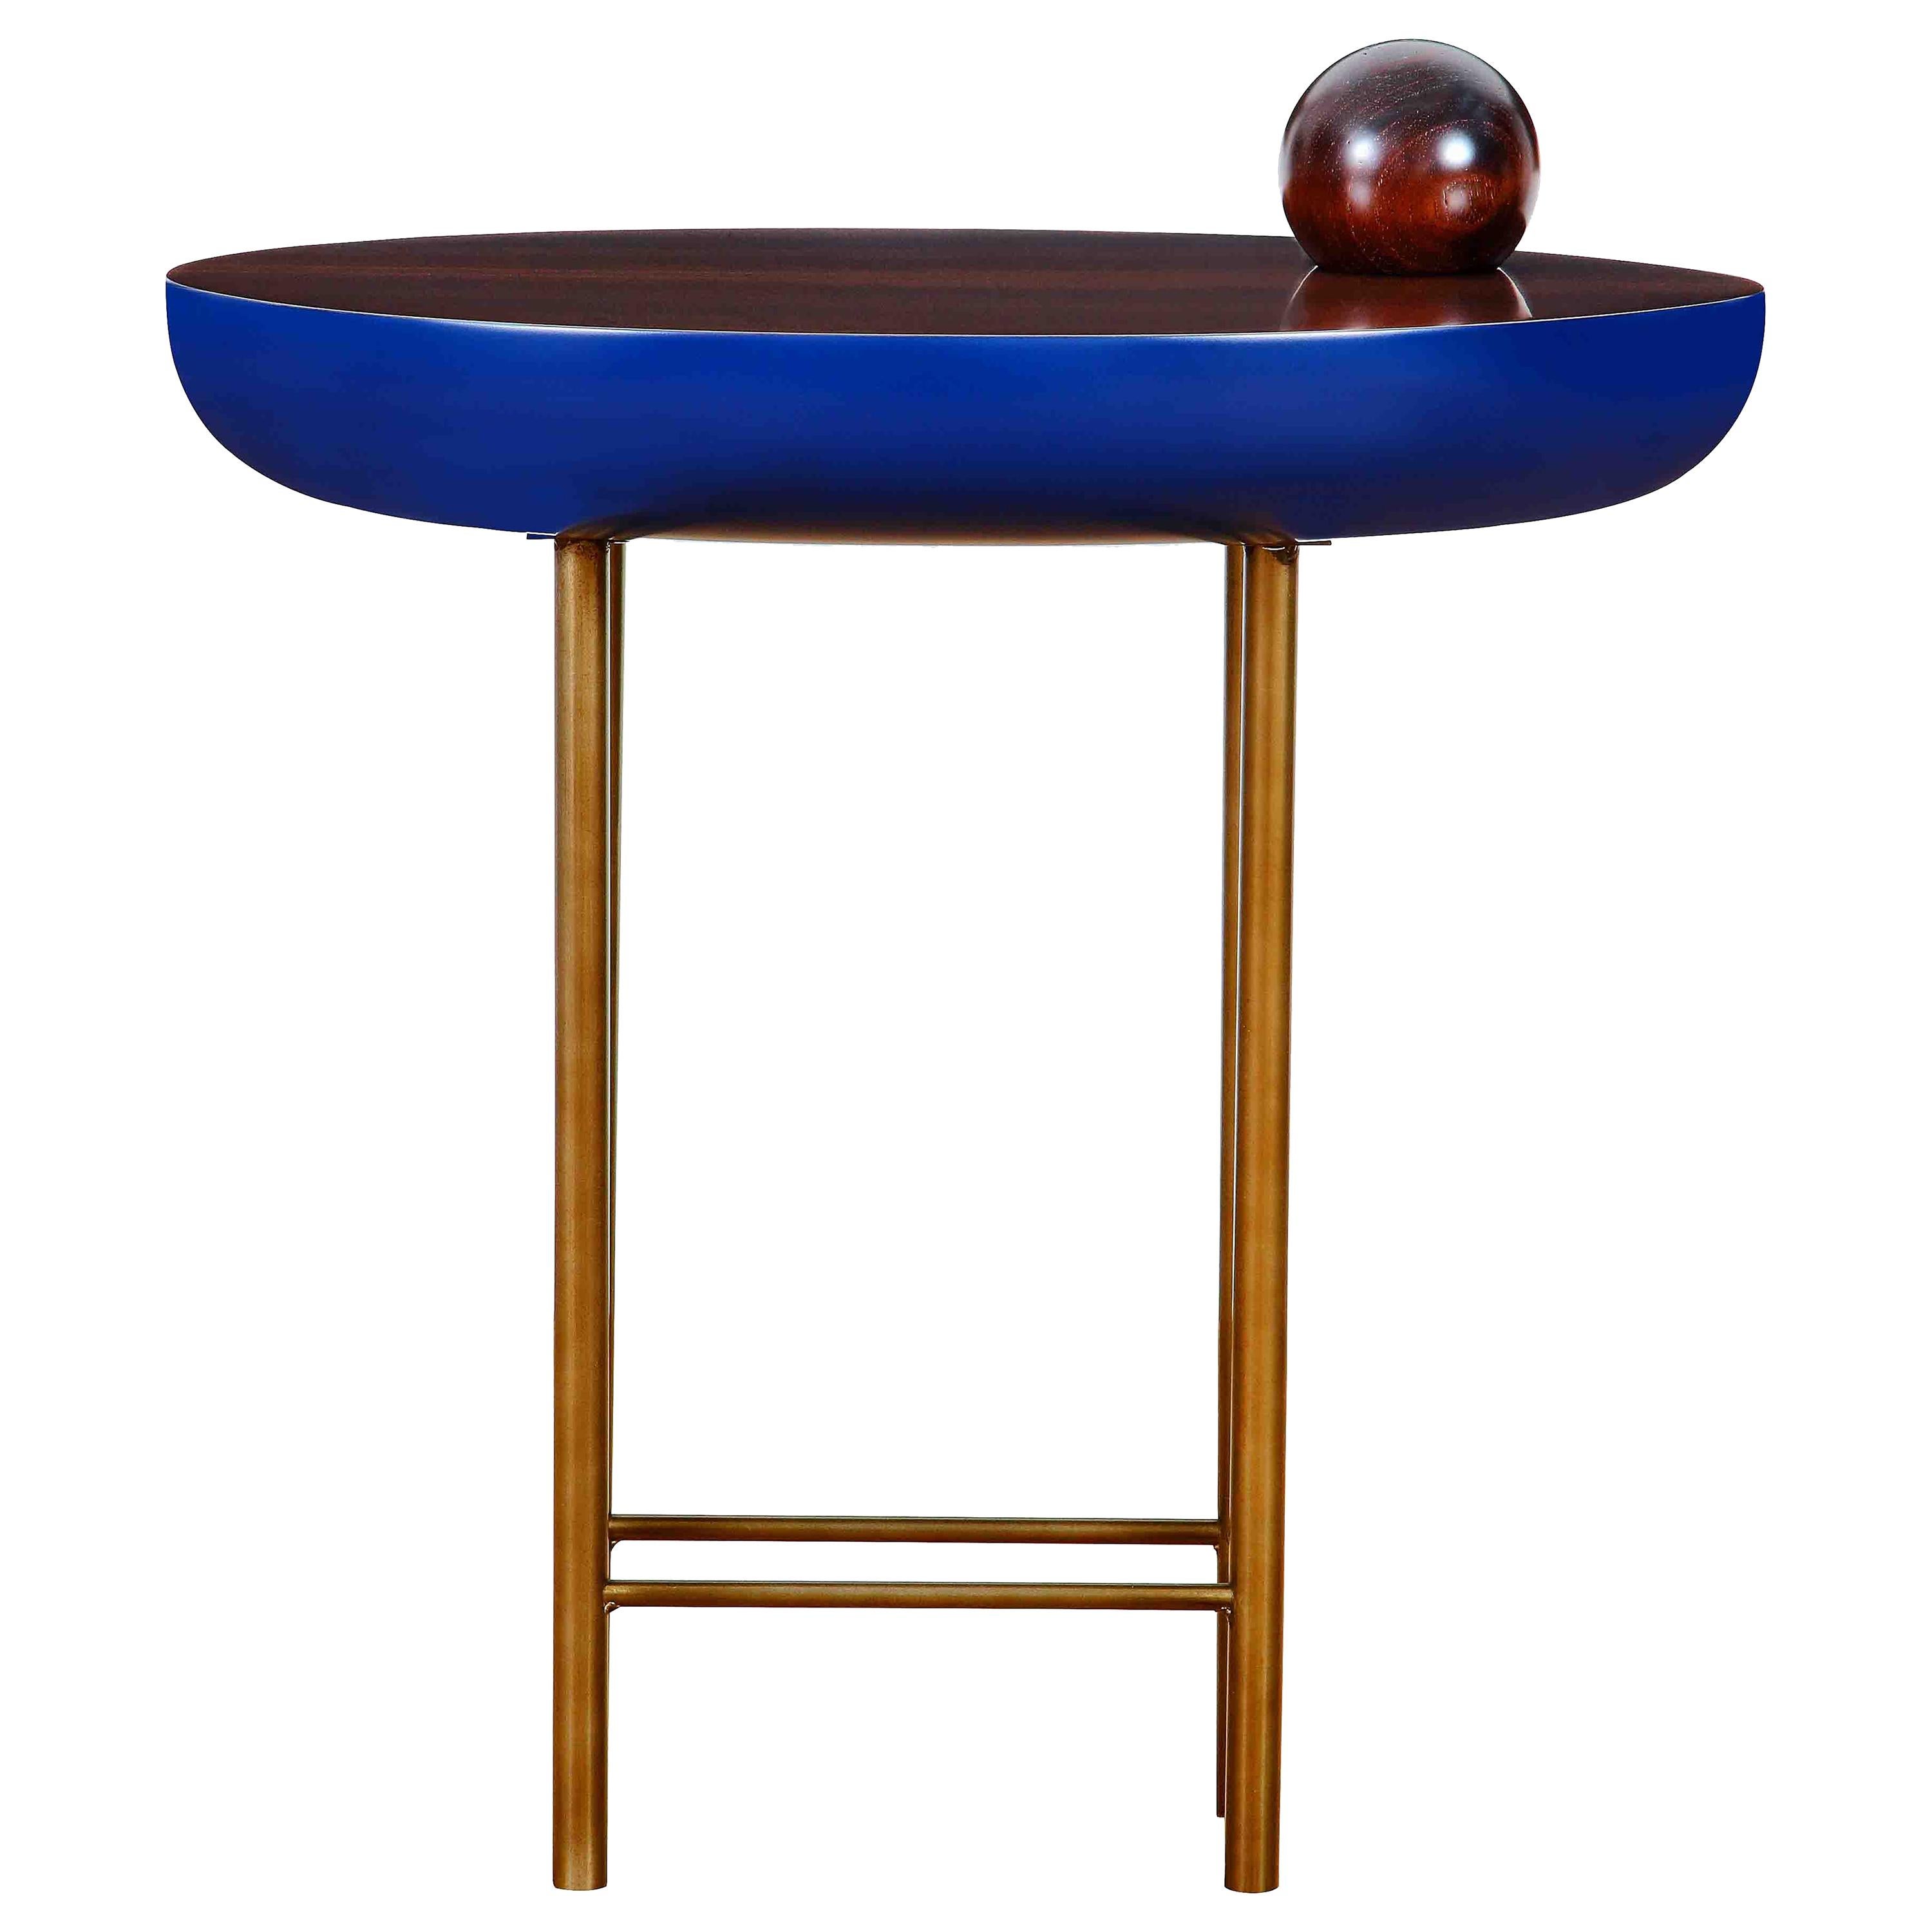 "ORGANIC" Wood and Lacquer Lateral Table For Sale